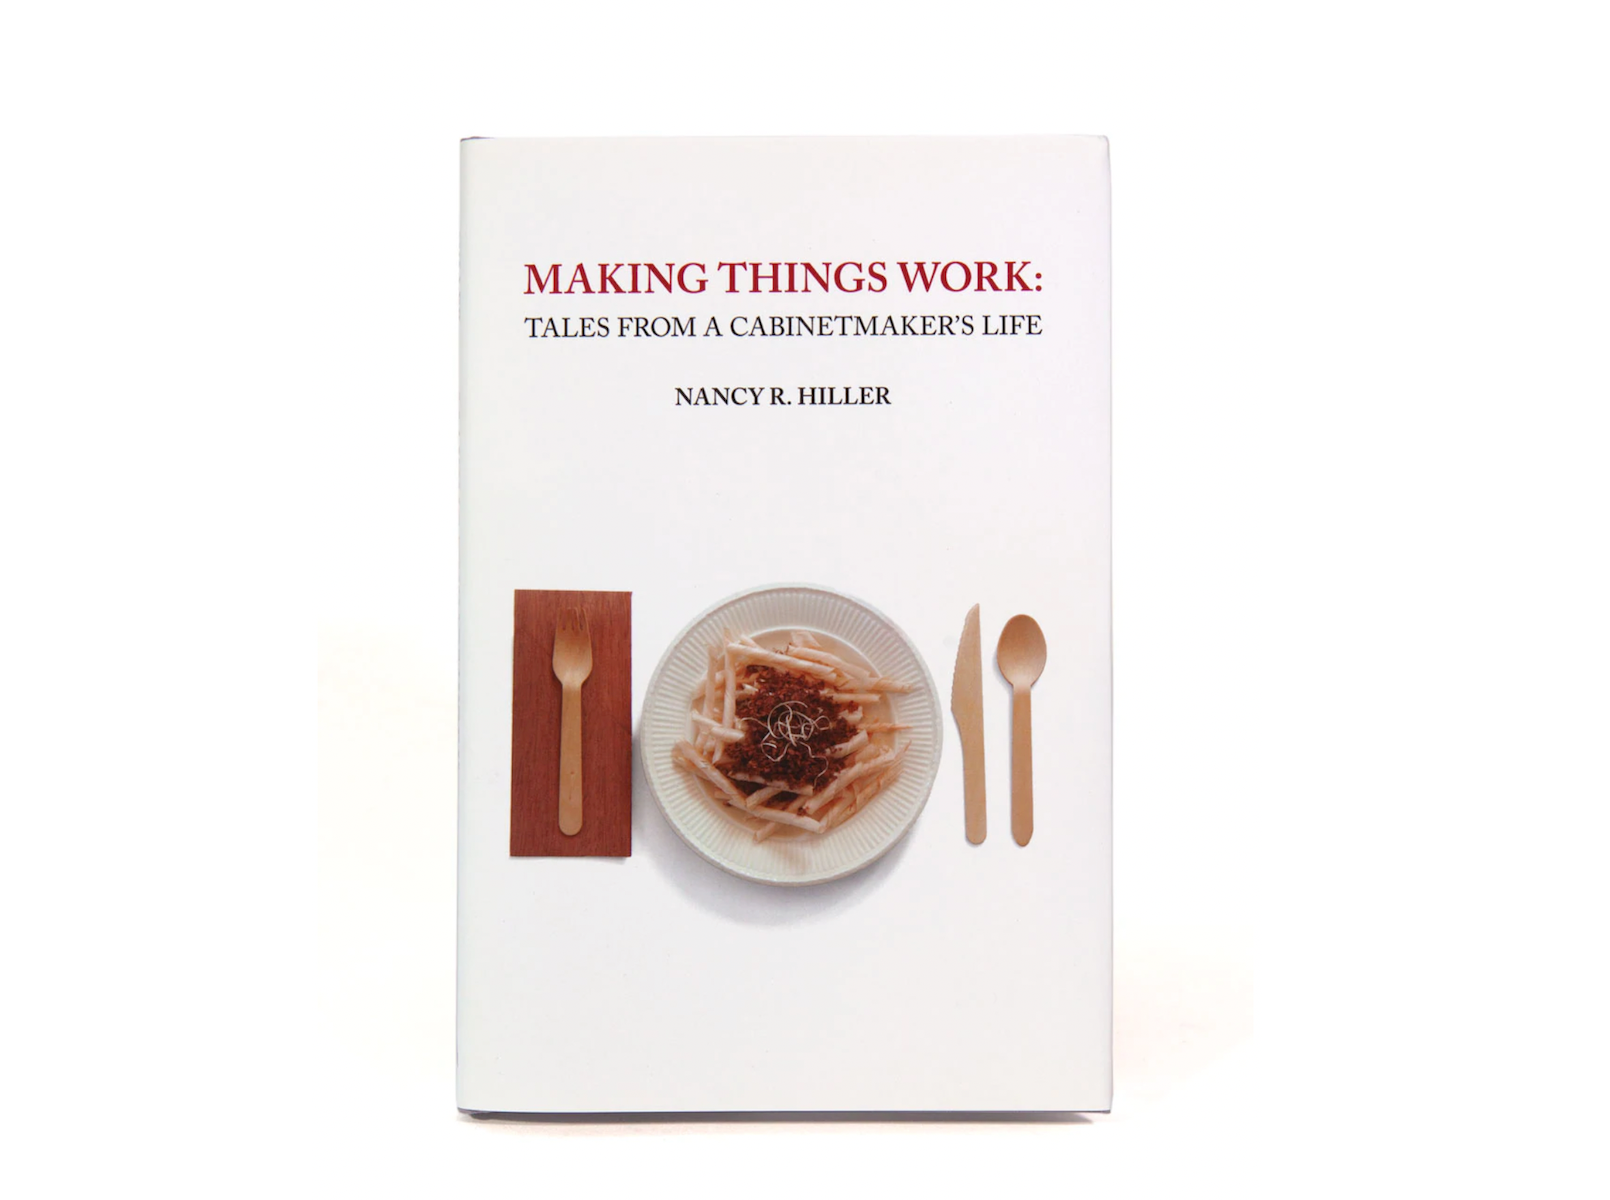 Making Things Work: Tales from a Cabinetmaker’s Life (Second Edition)